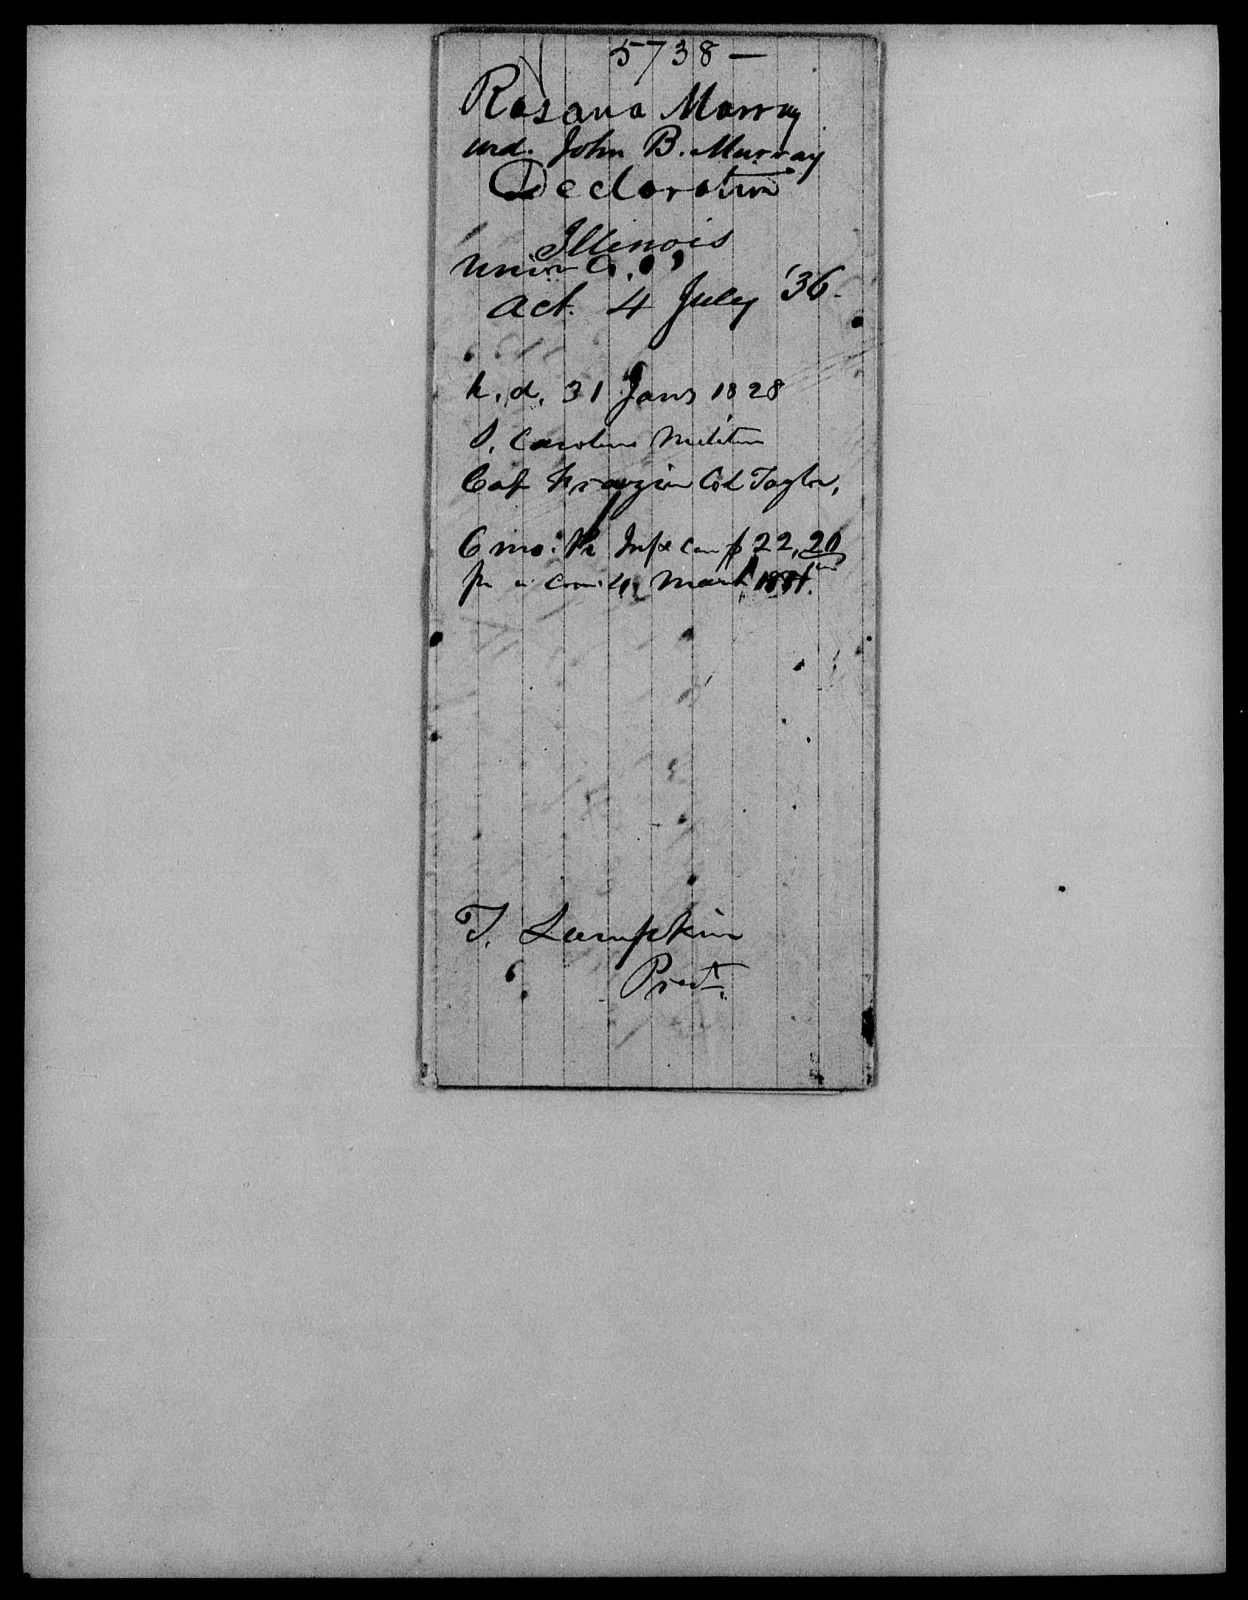 Application for a Widow's Pension from Rosana Murray, 30 October 1842, page 4